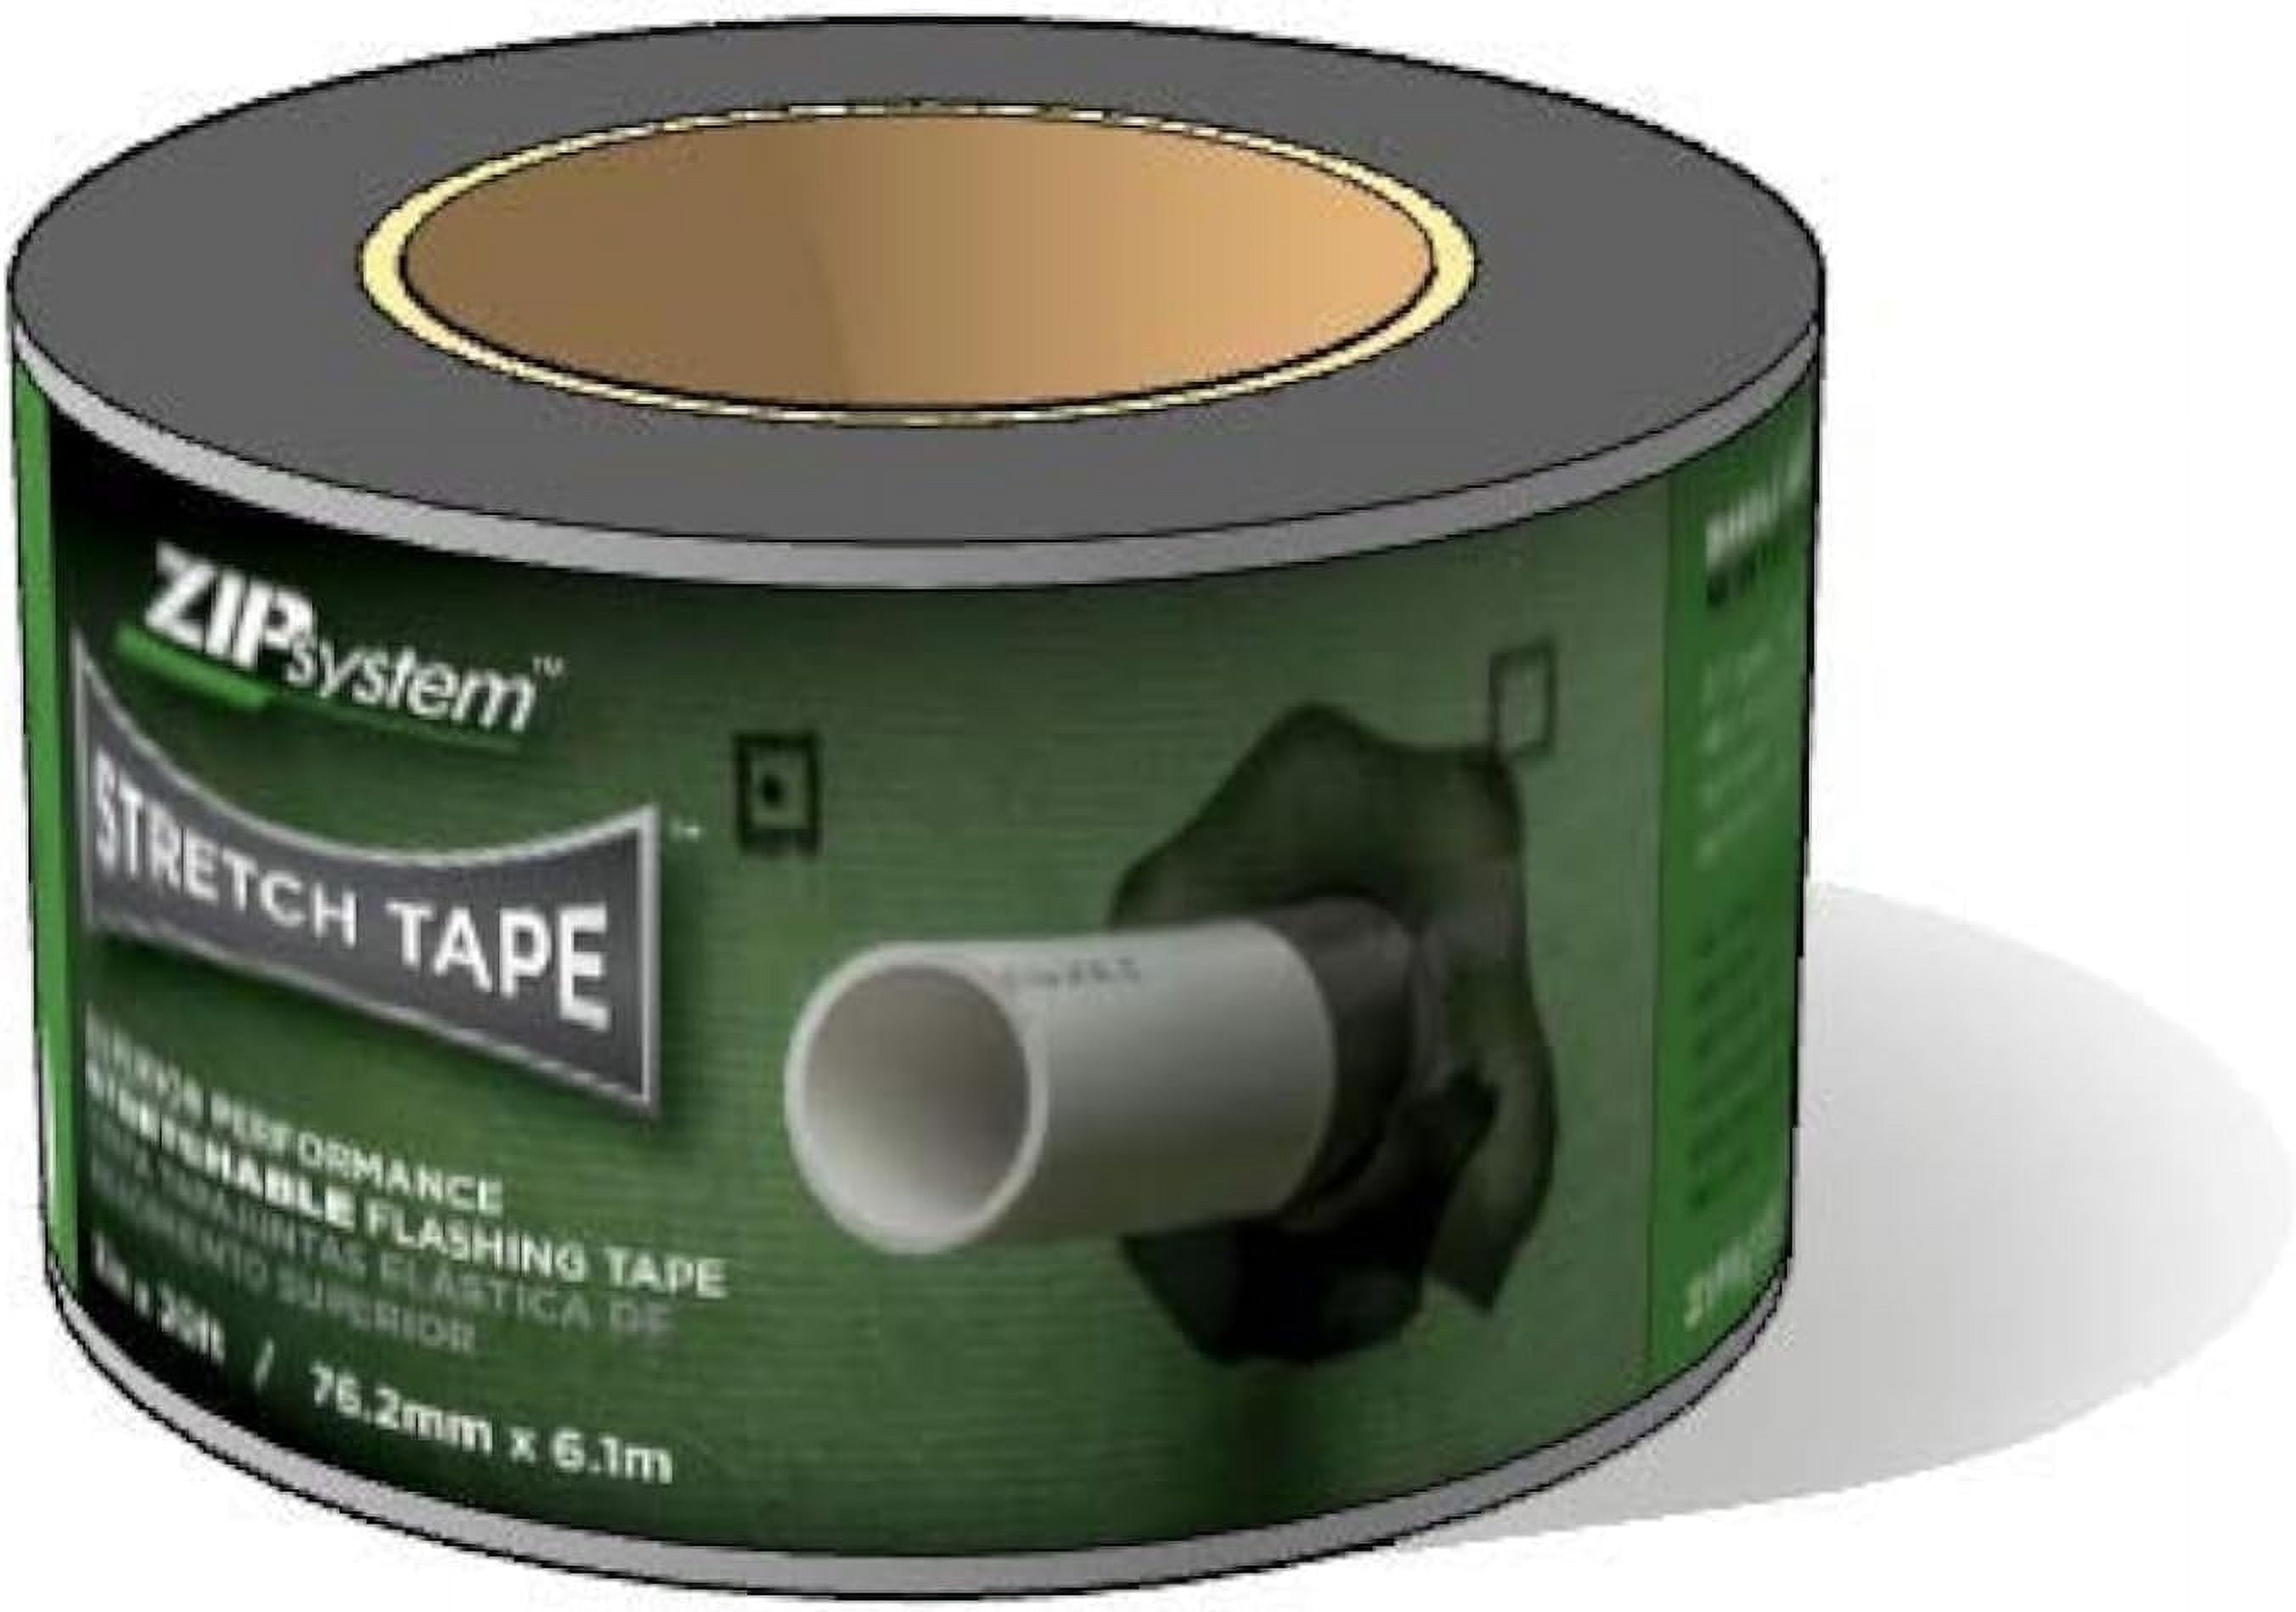 Huber ZIP System Flashing Tape, 3.75 in x 90 ft, Self-Adhesive Flashing  for Structural Panels, Doors-Windows Rough Openings